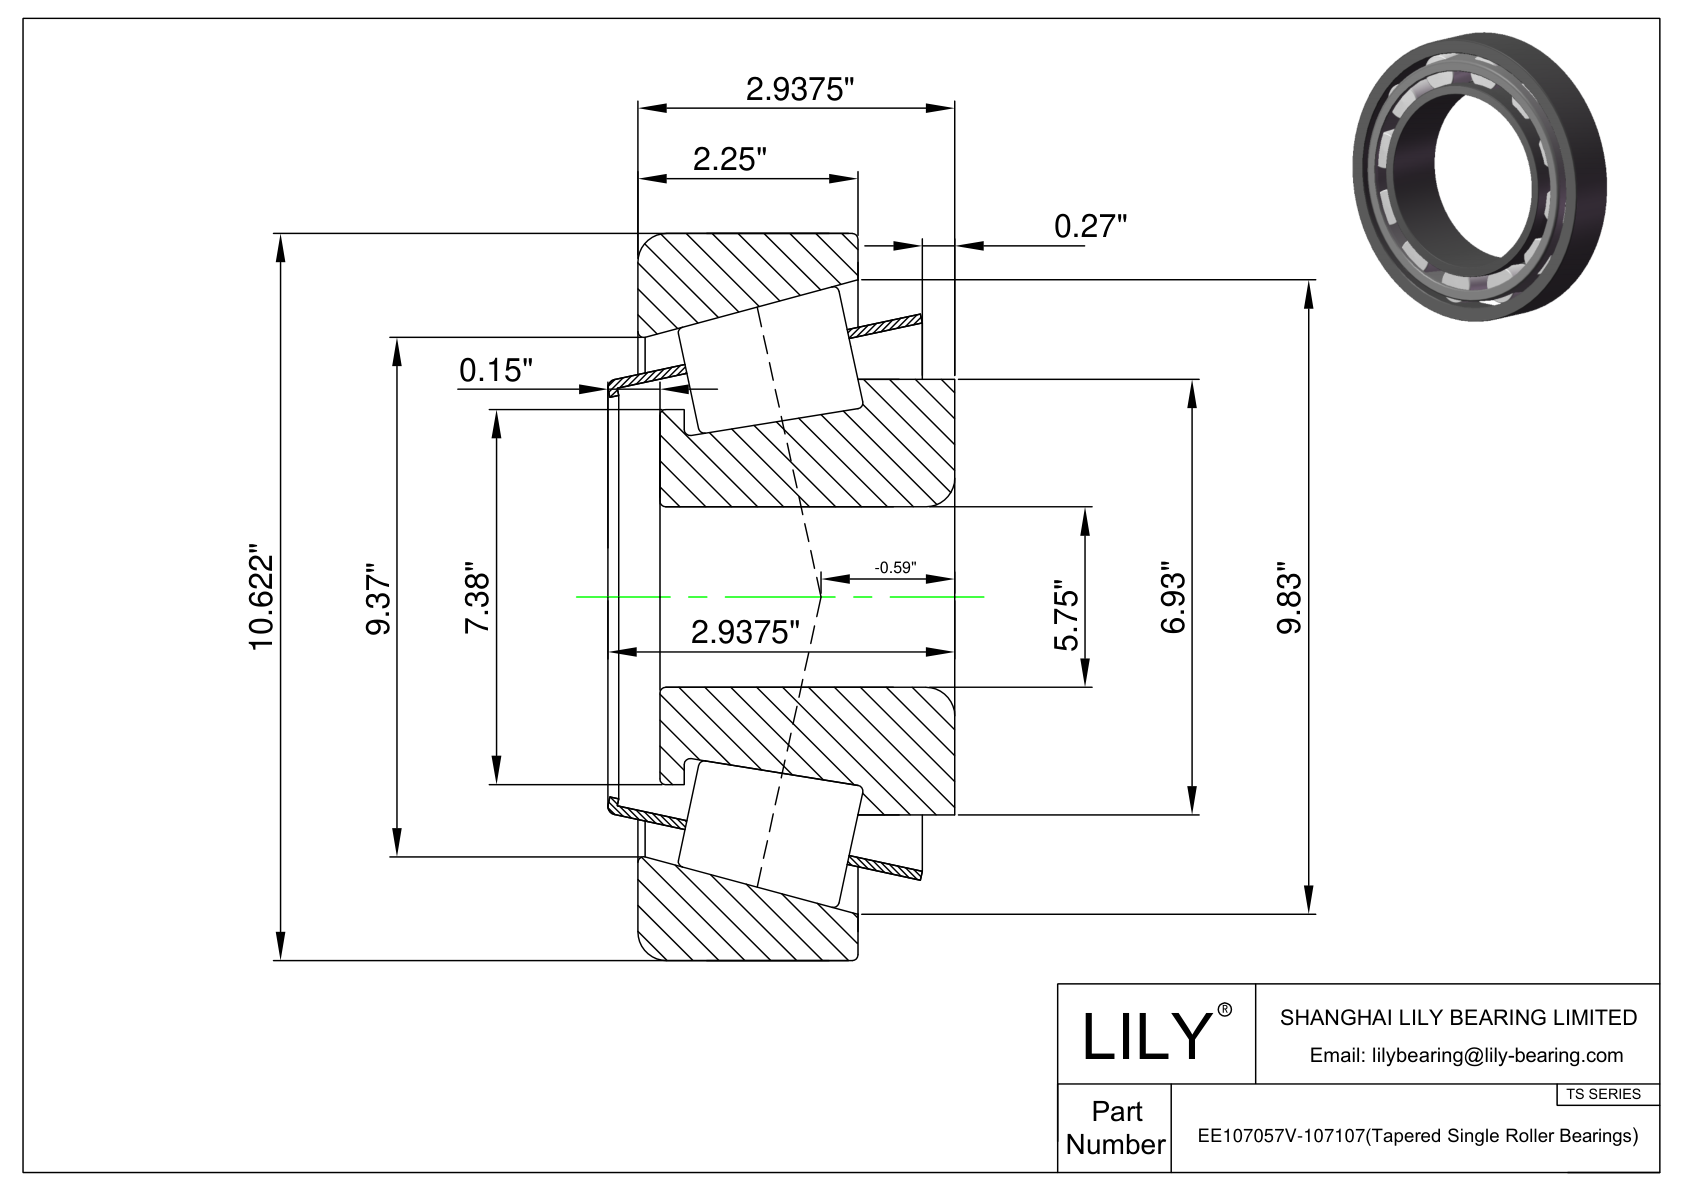 EE107057V-107107 TS (Tapered Single Roller Bearings) (Imperial) cad drawing